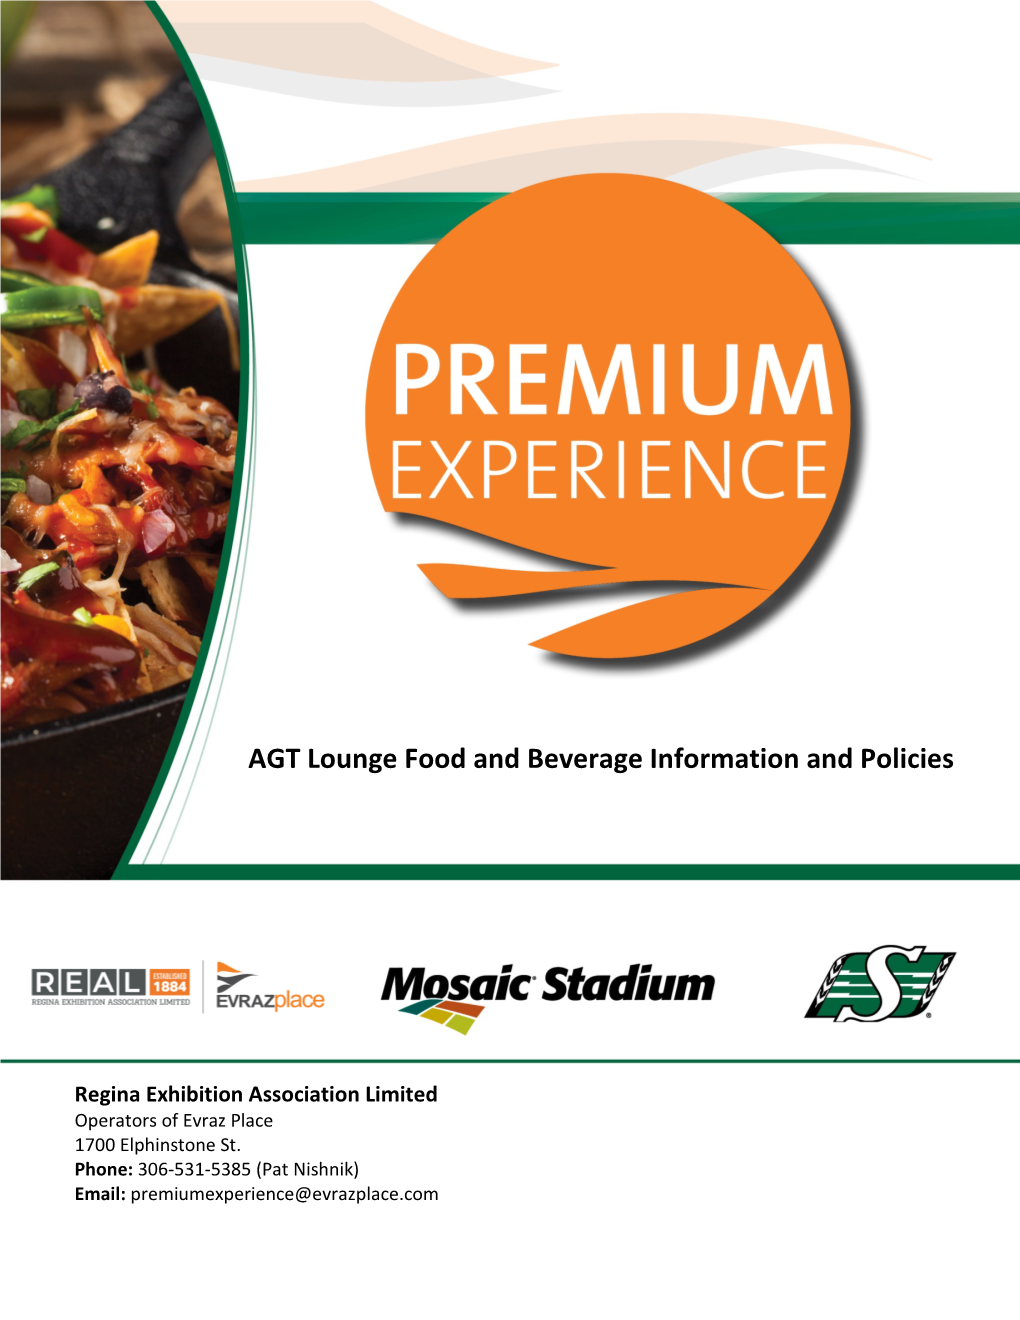 AGT Lounge Food and Beverage Information and Policies